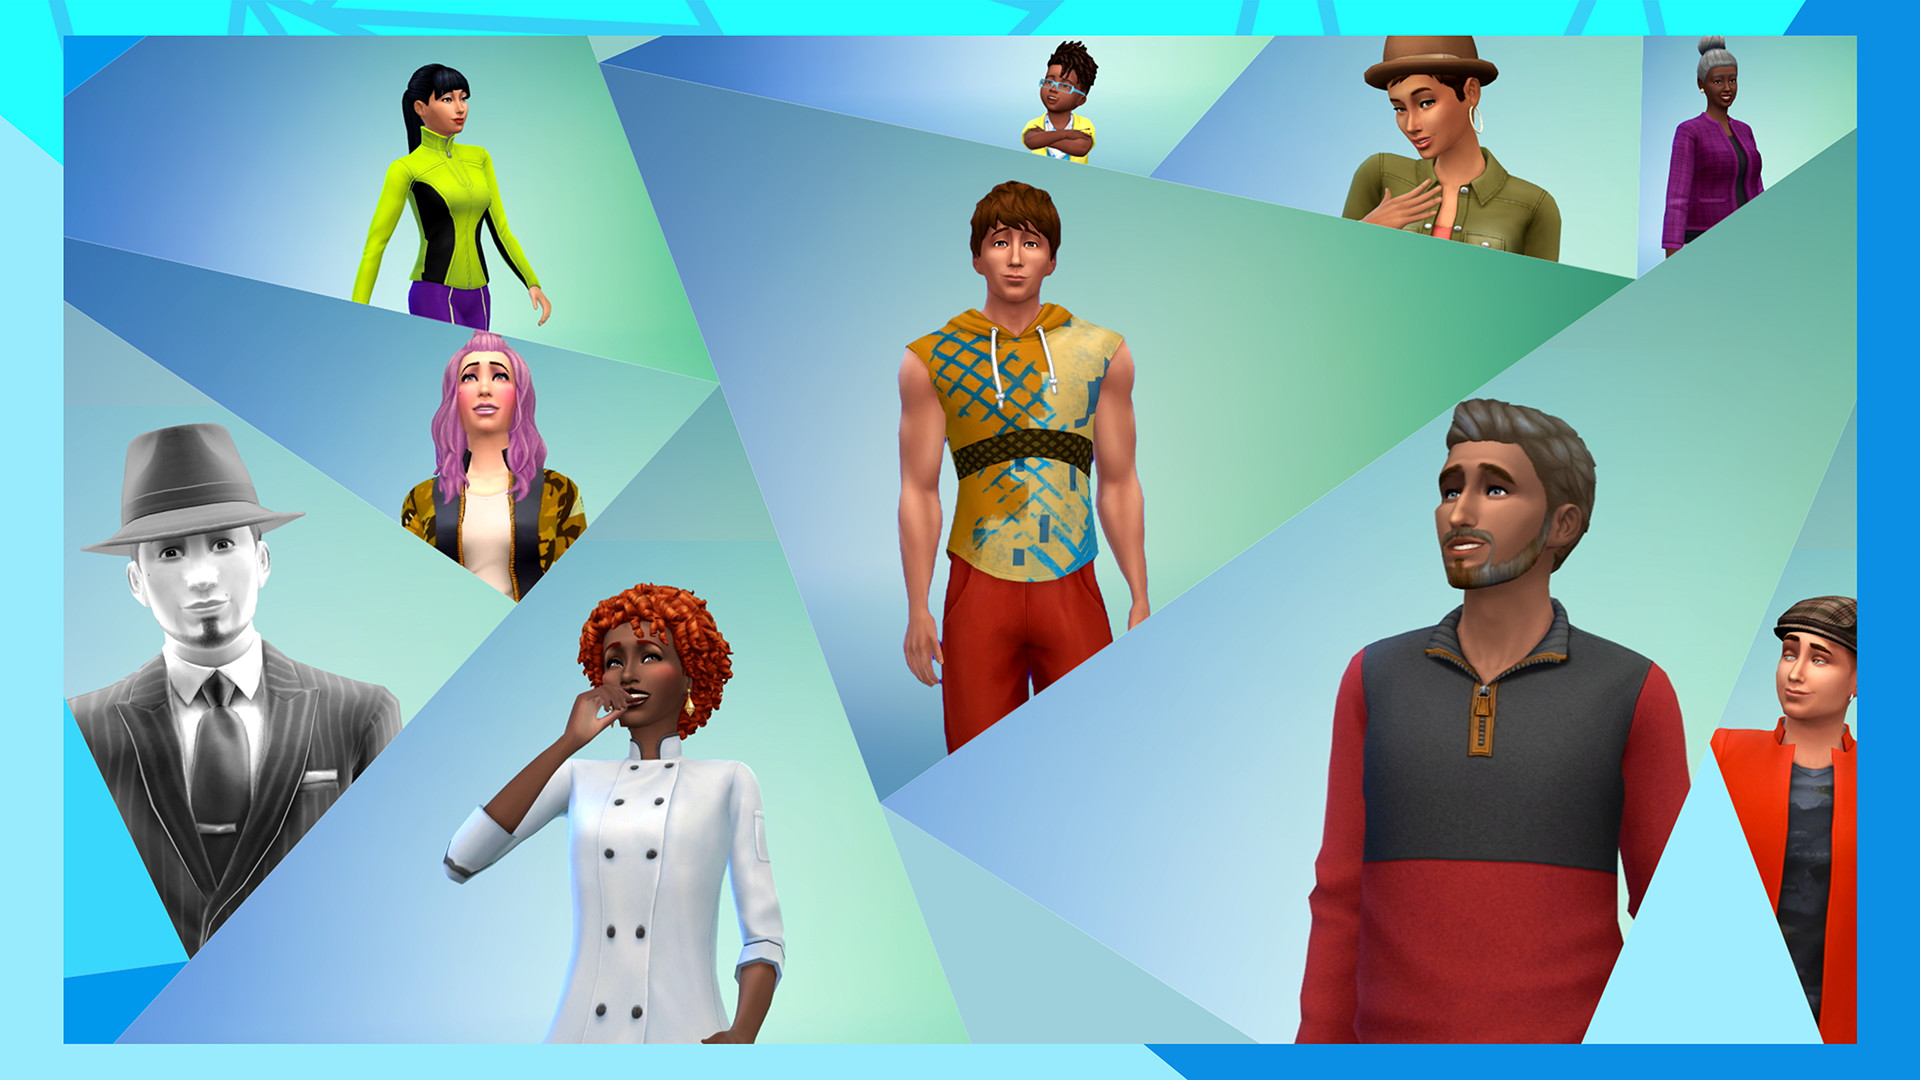 the sims 4 download free full version for windows 10